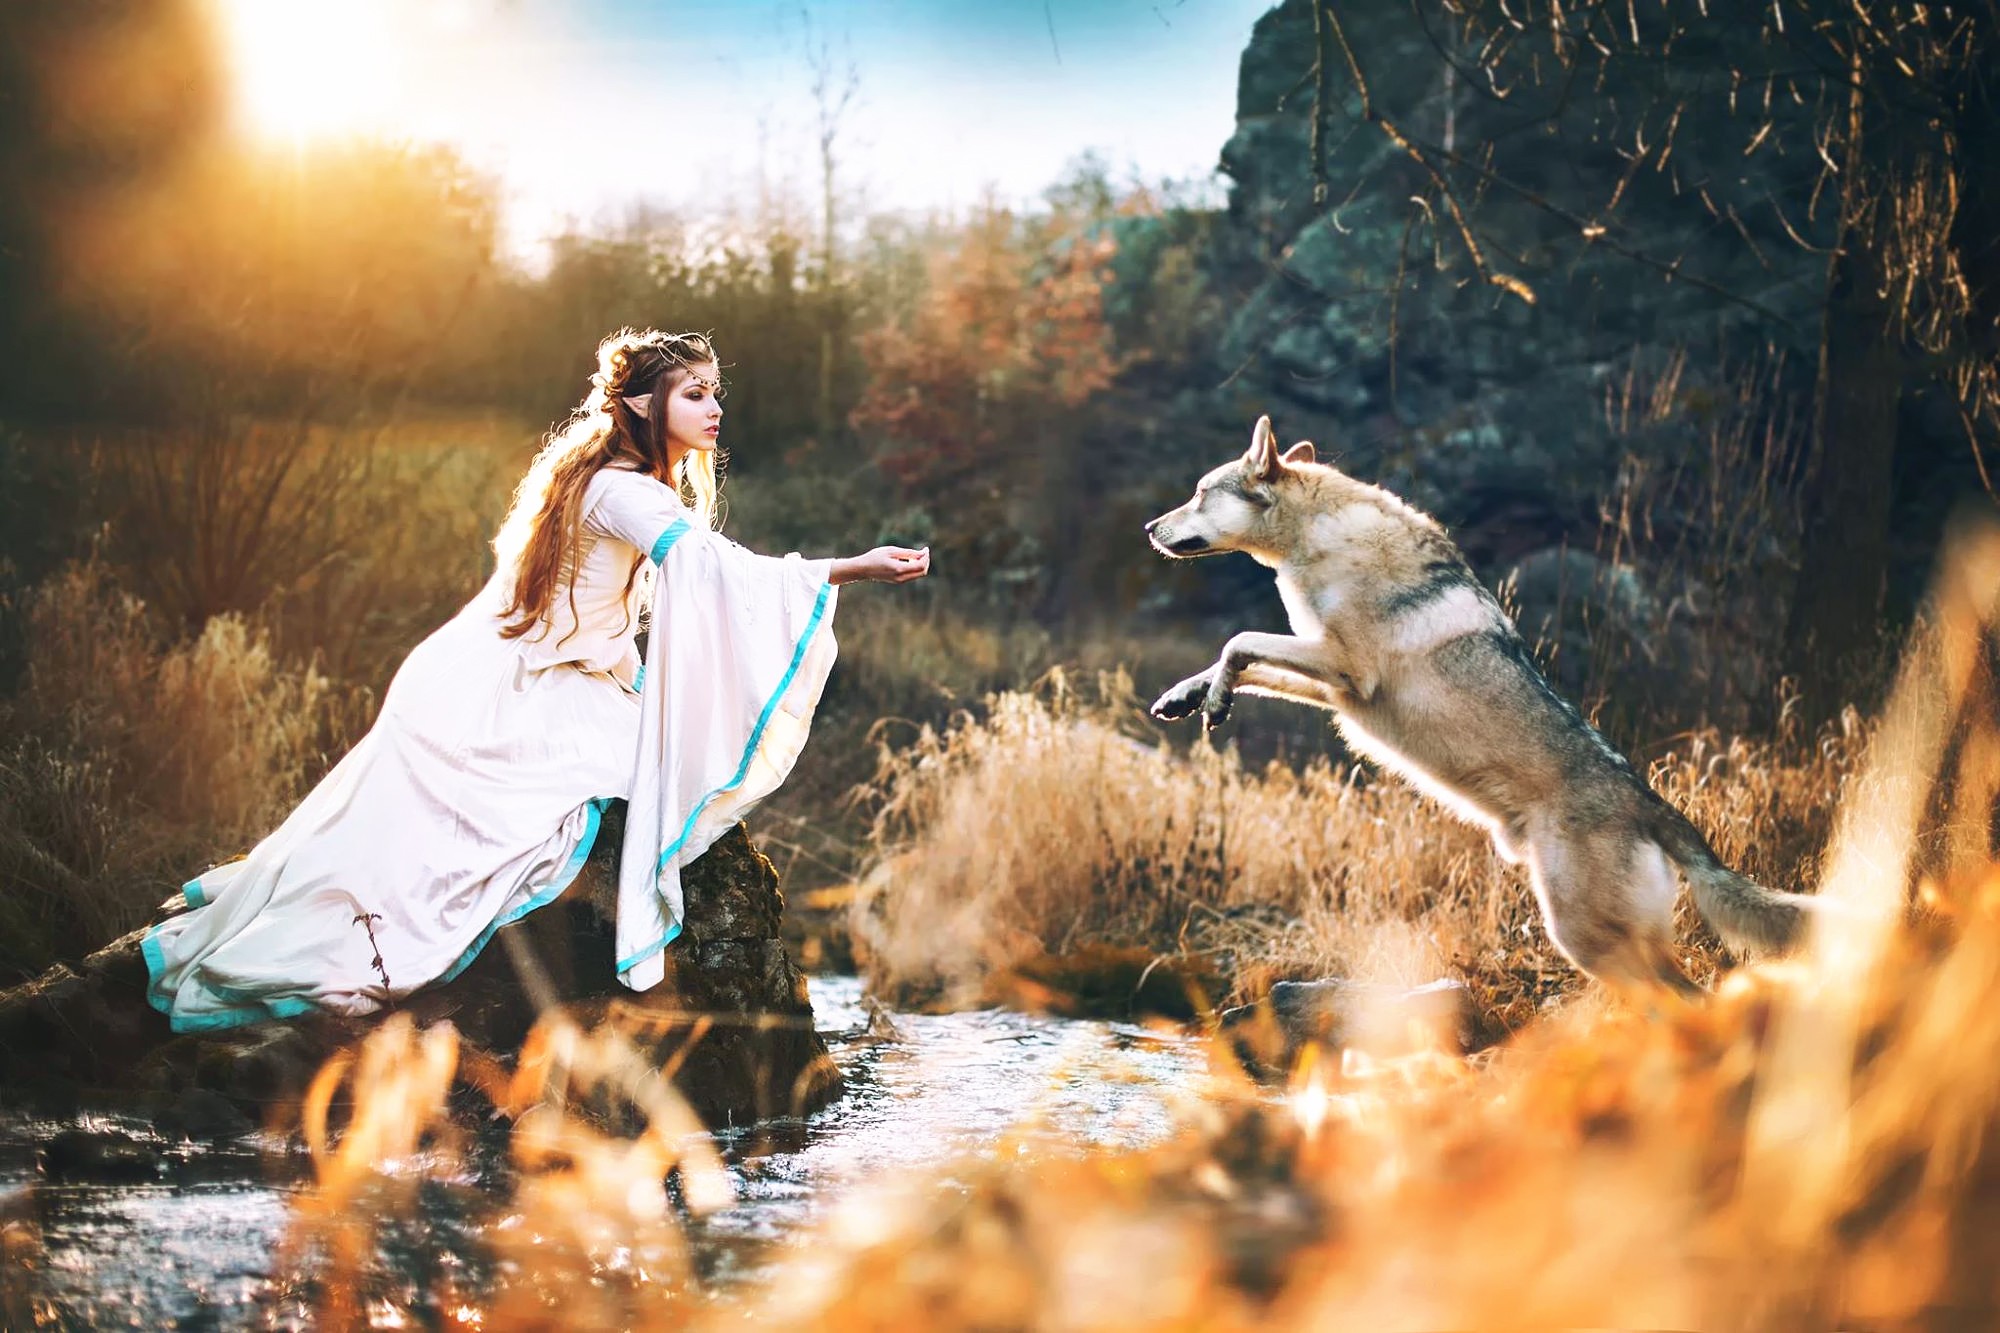 People 2000x1333 elves water stream dog women cosplay fantasy girl model animals long hair women outdoors pointy ears